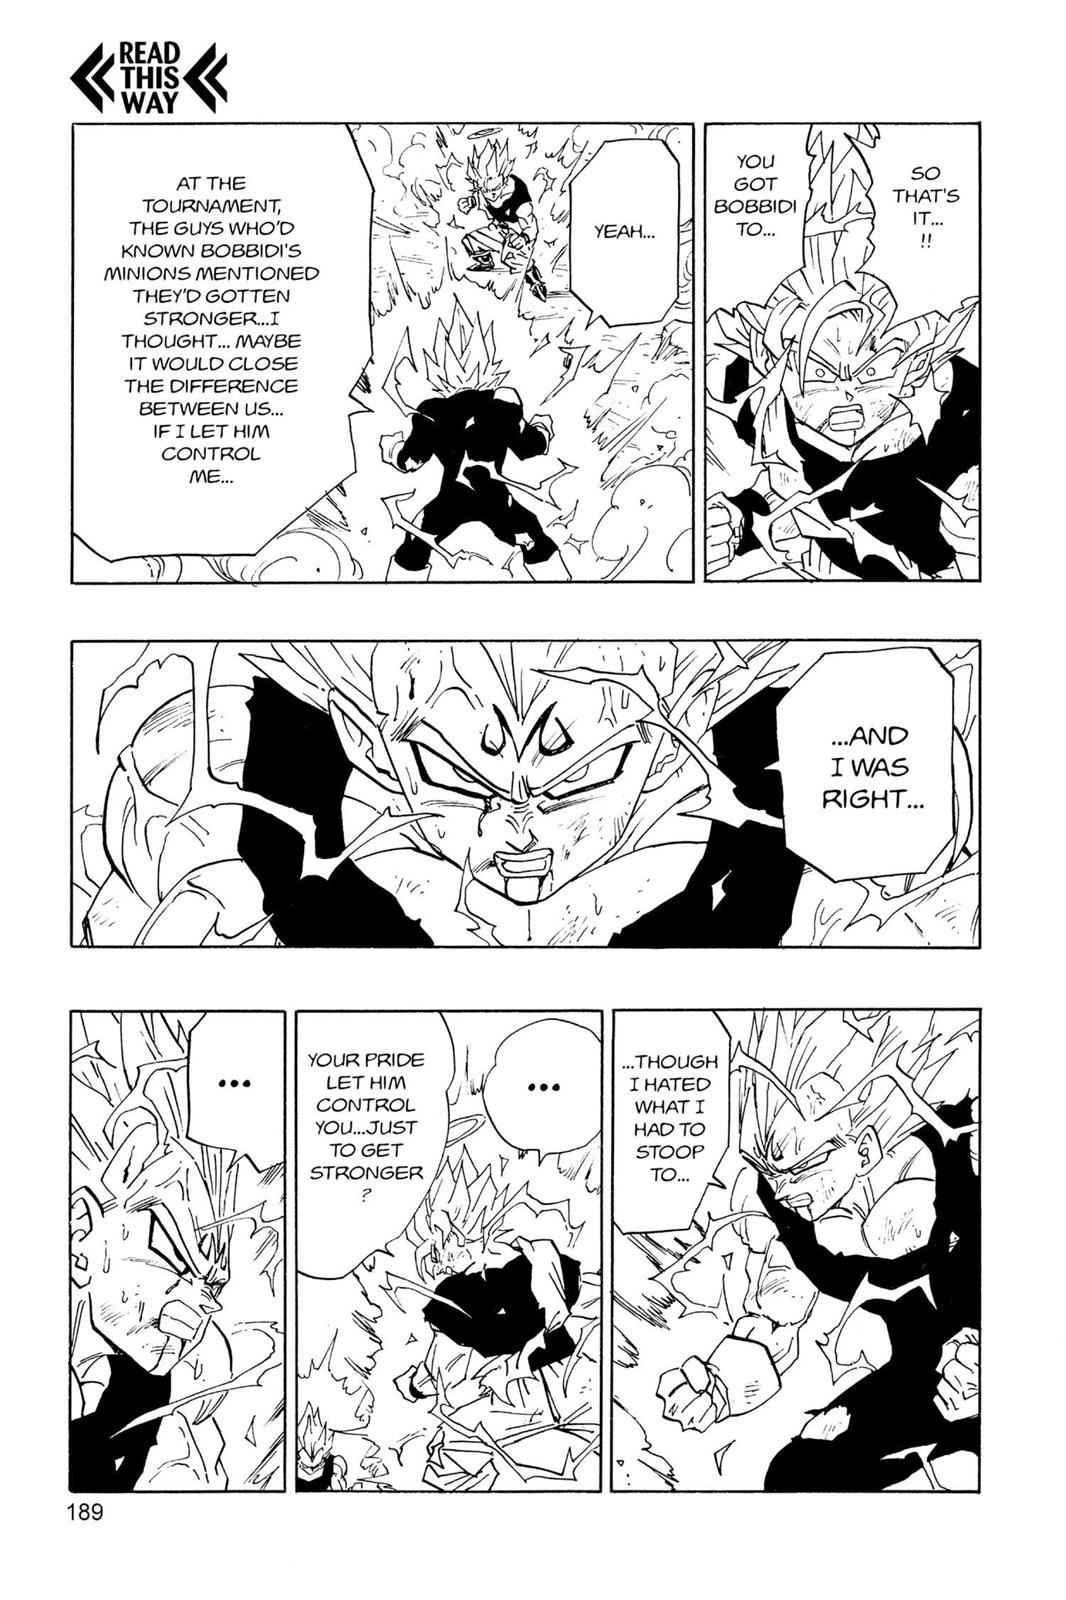 Universe 12 - Hope and despair - Chapter 92, Page 2137 - DBMultiverse